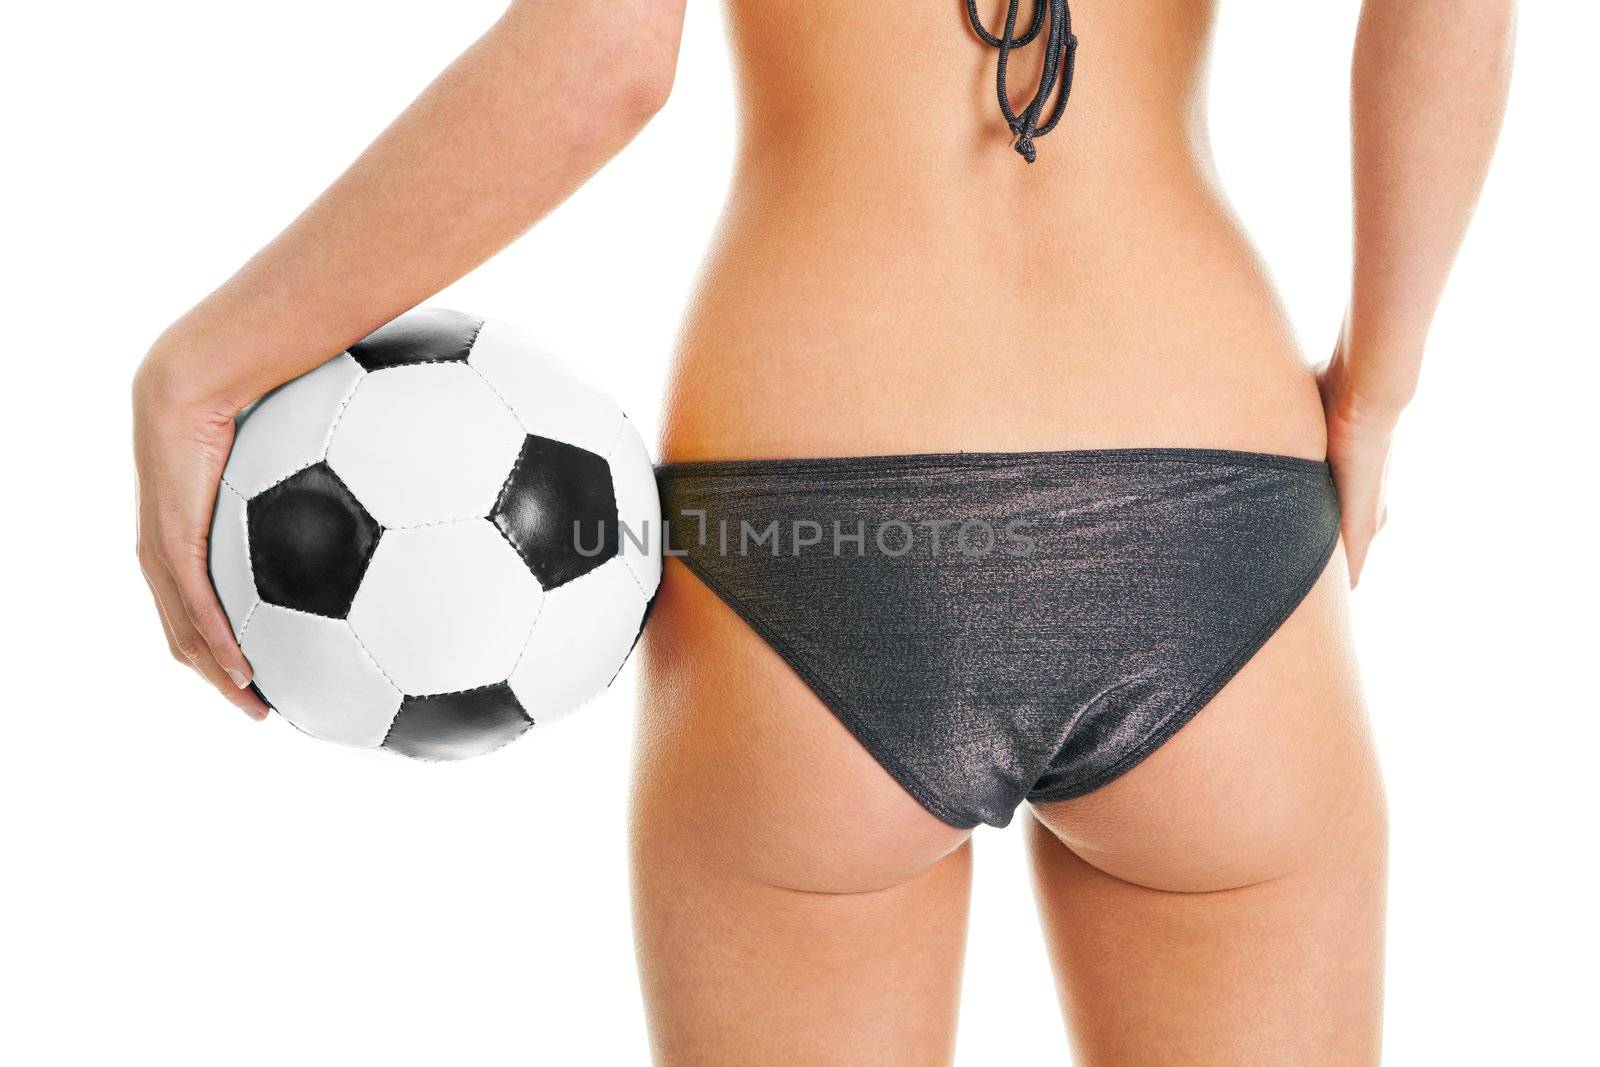 Beautilful woman in bikini posing with soccer ball. Isolated on white